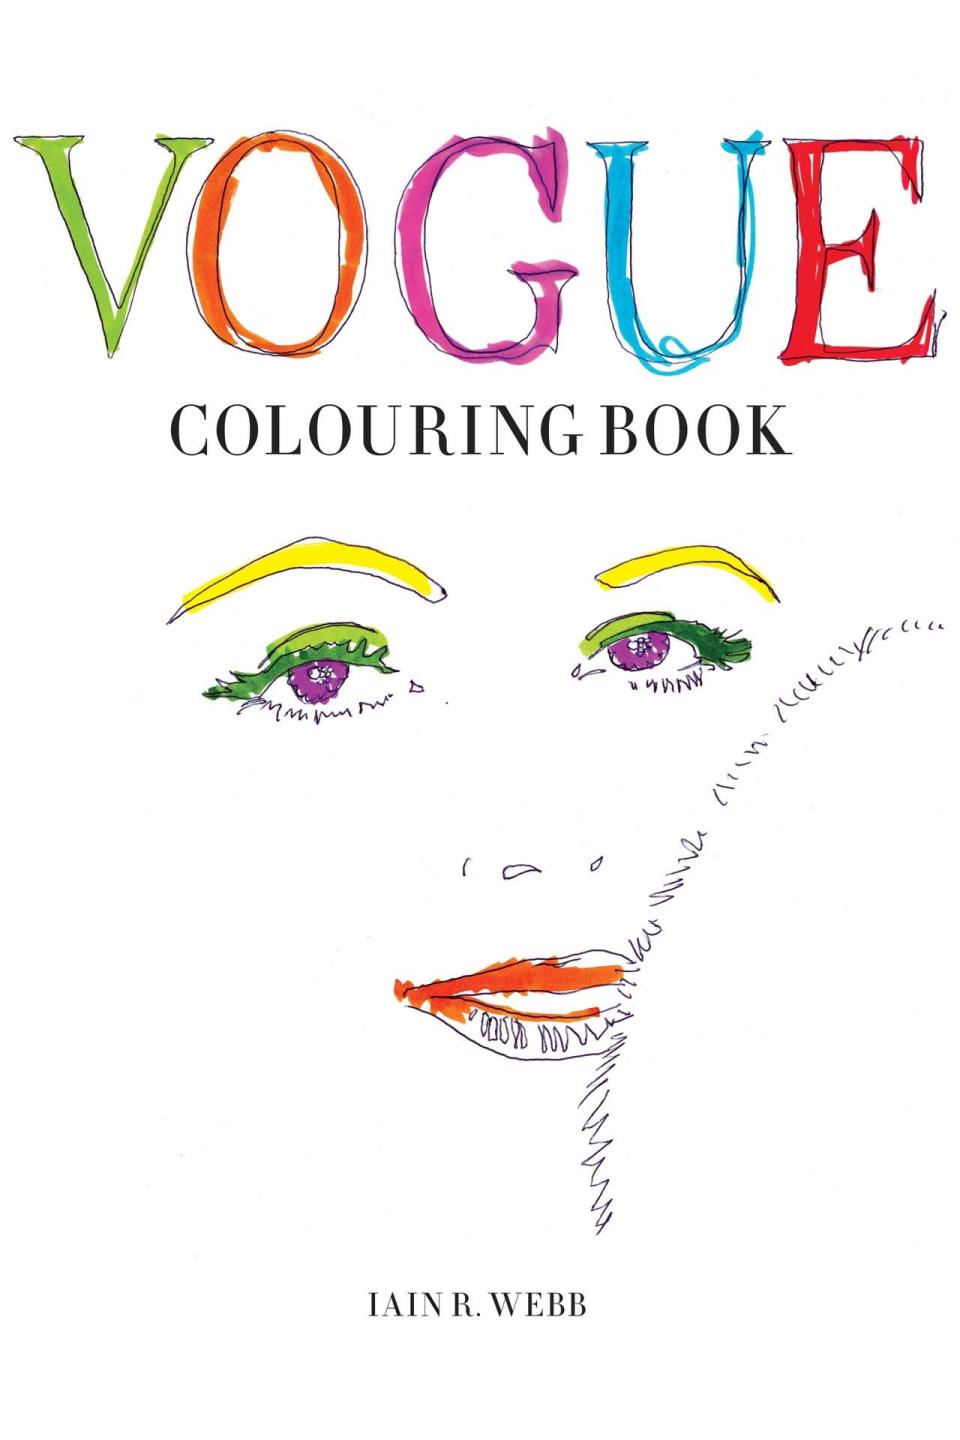 The Vogue Colouring Book: The unofficial fashion bible’s colouring book features drawings inspired by the pages of the magazine in the ‘50s. Use your markers to reimagine the colours of ball gowns and cocktail dresses from major designers like Christian Dior, Balenciaga, Givenchy and Chanel. 